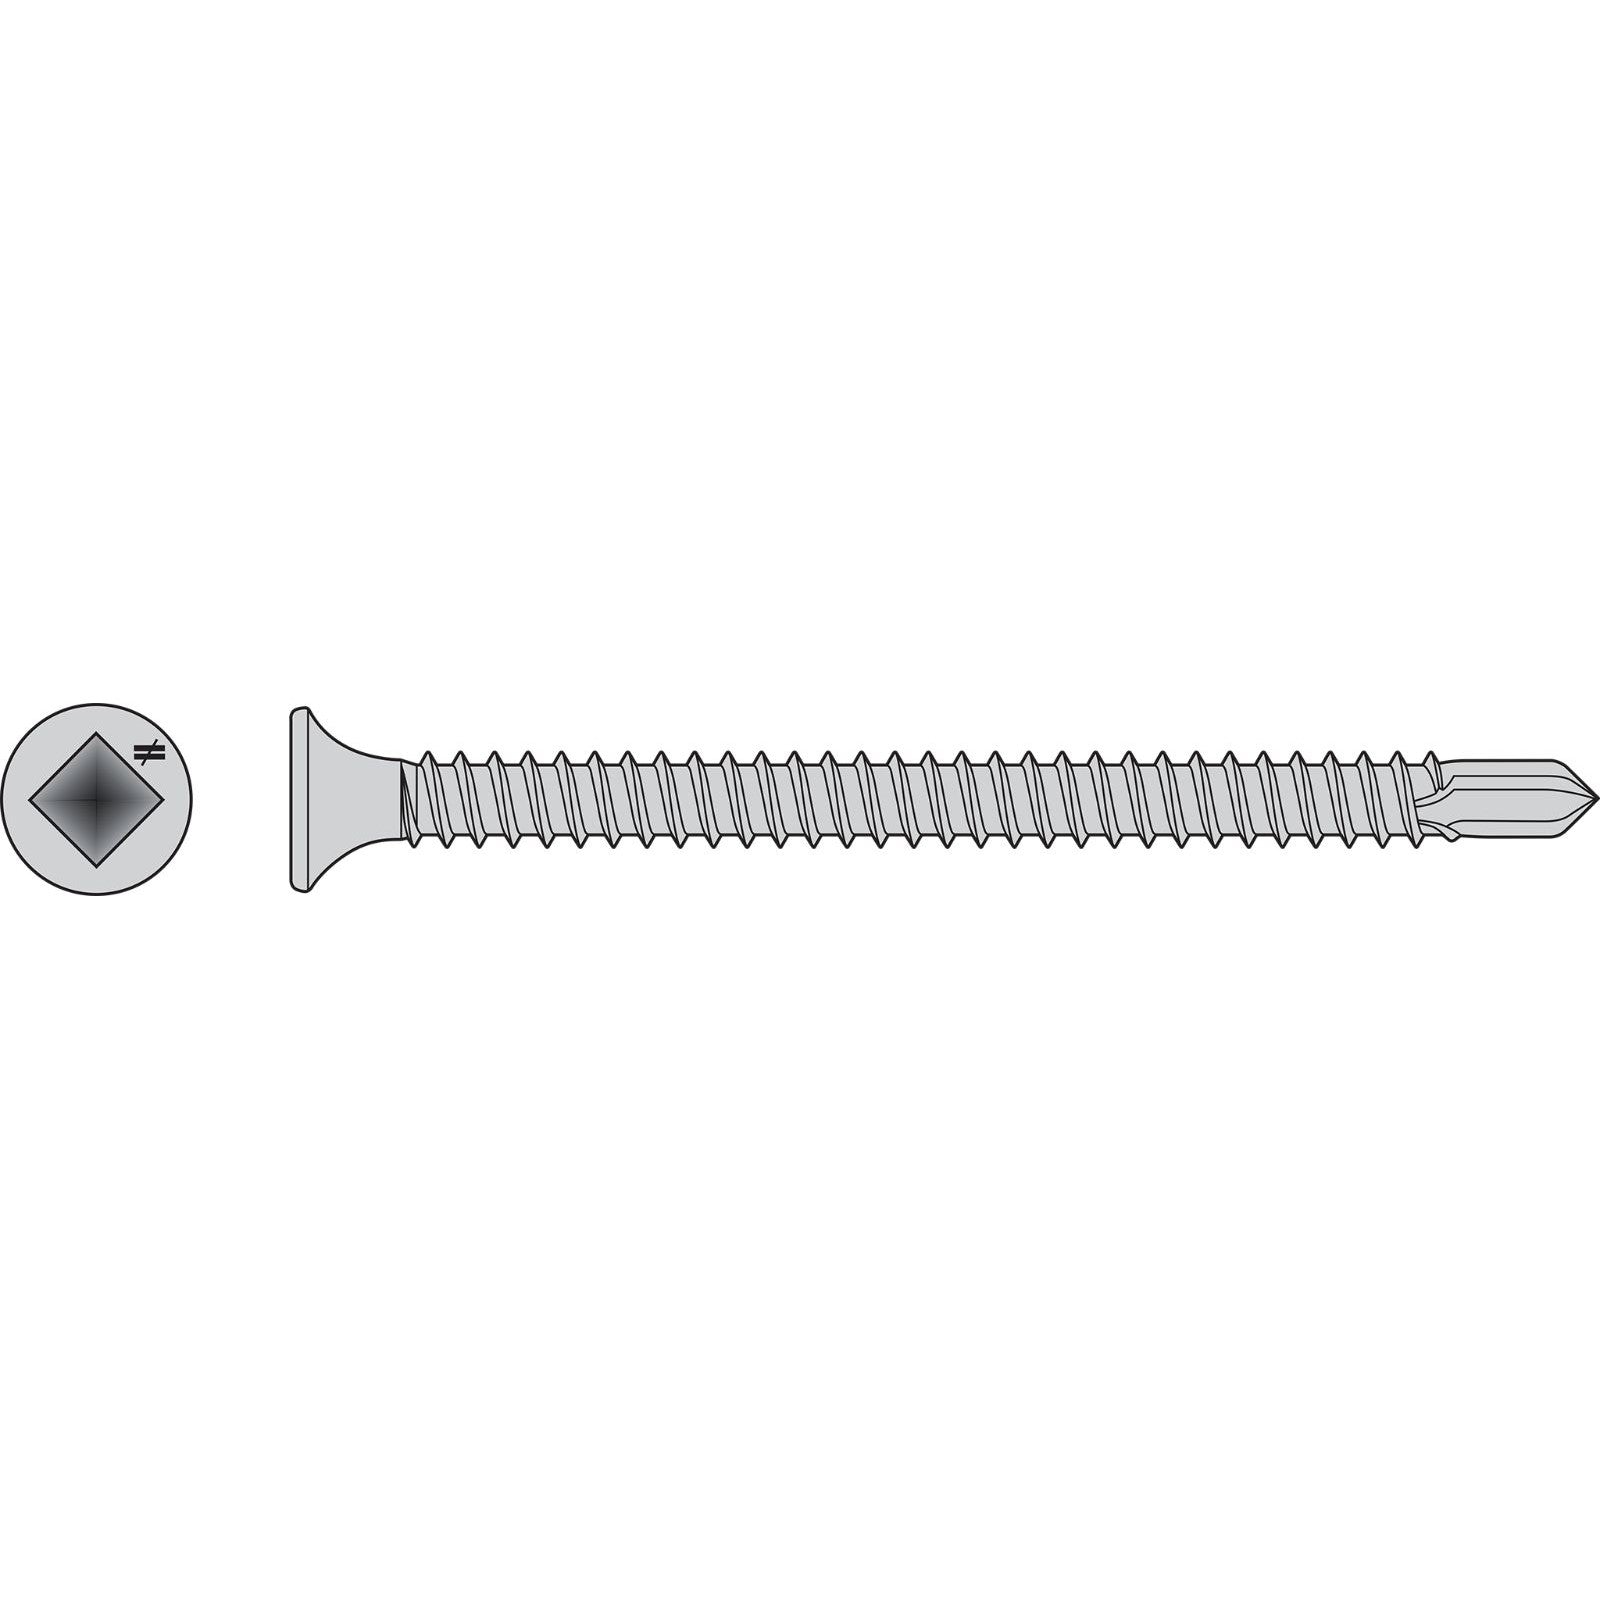 #10 x 212 inch Square Drive SelfDrilling BugleHead Screw 410 Stainless Steel Pkg 100